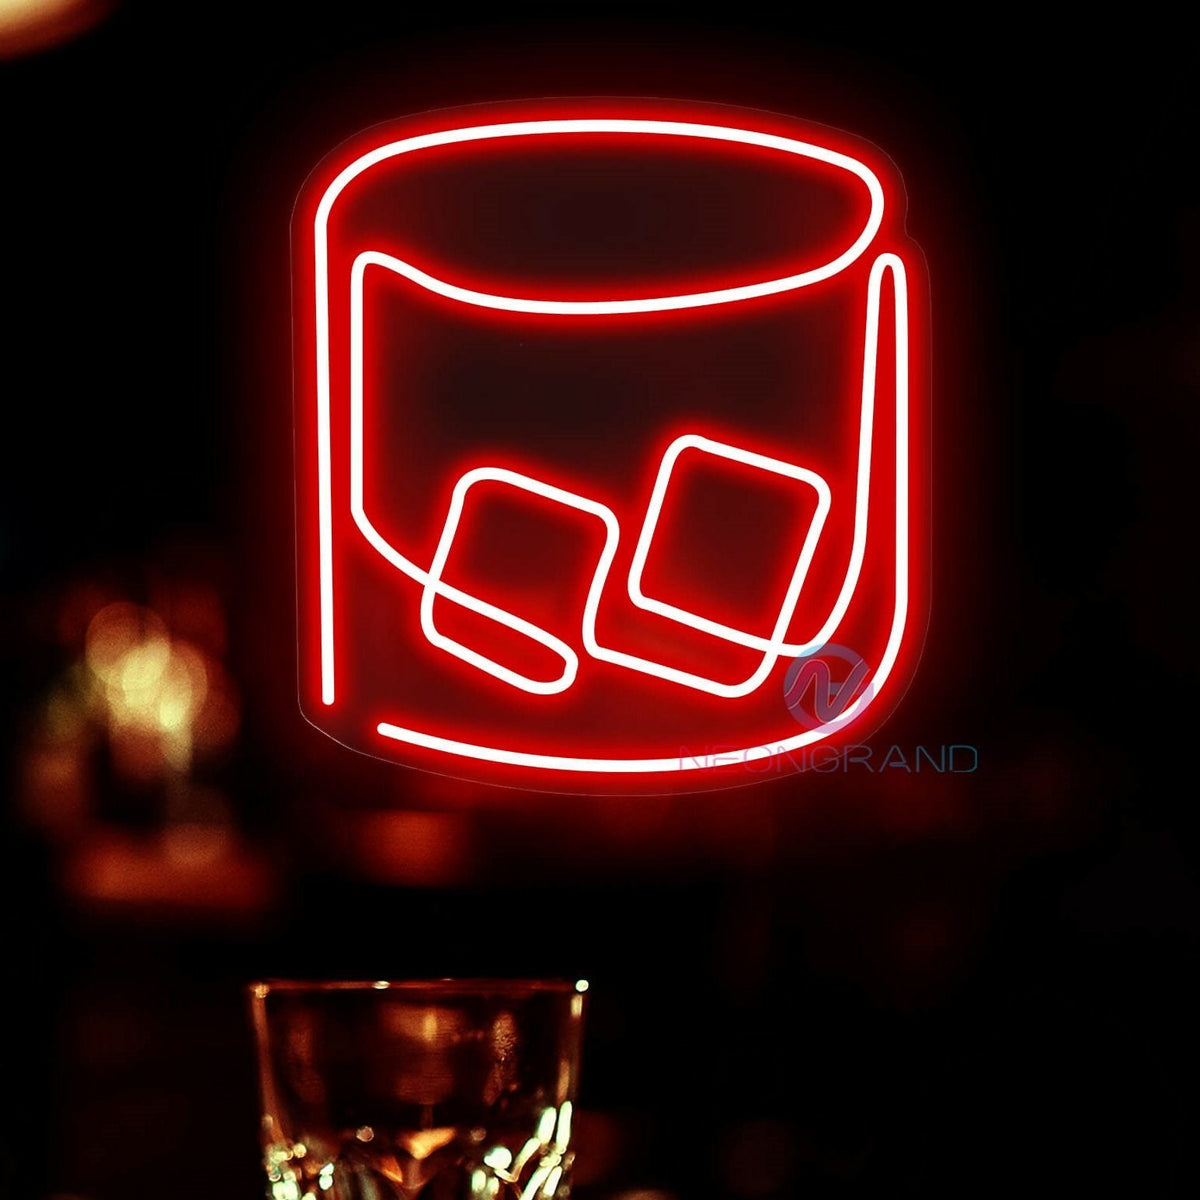 Whiskey Neon Sign Alcohol Drinking Led Light